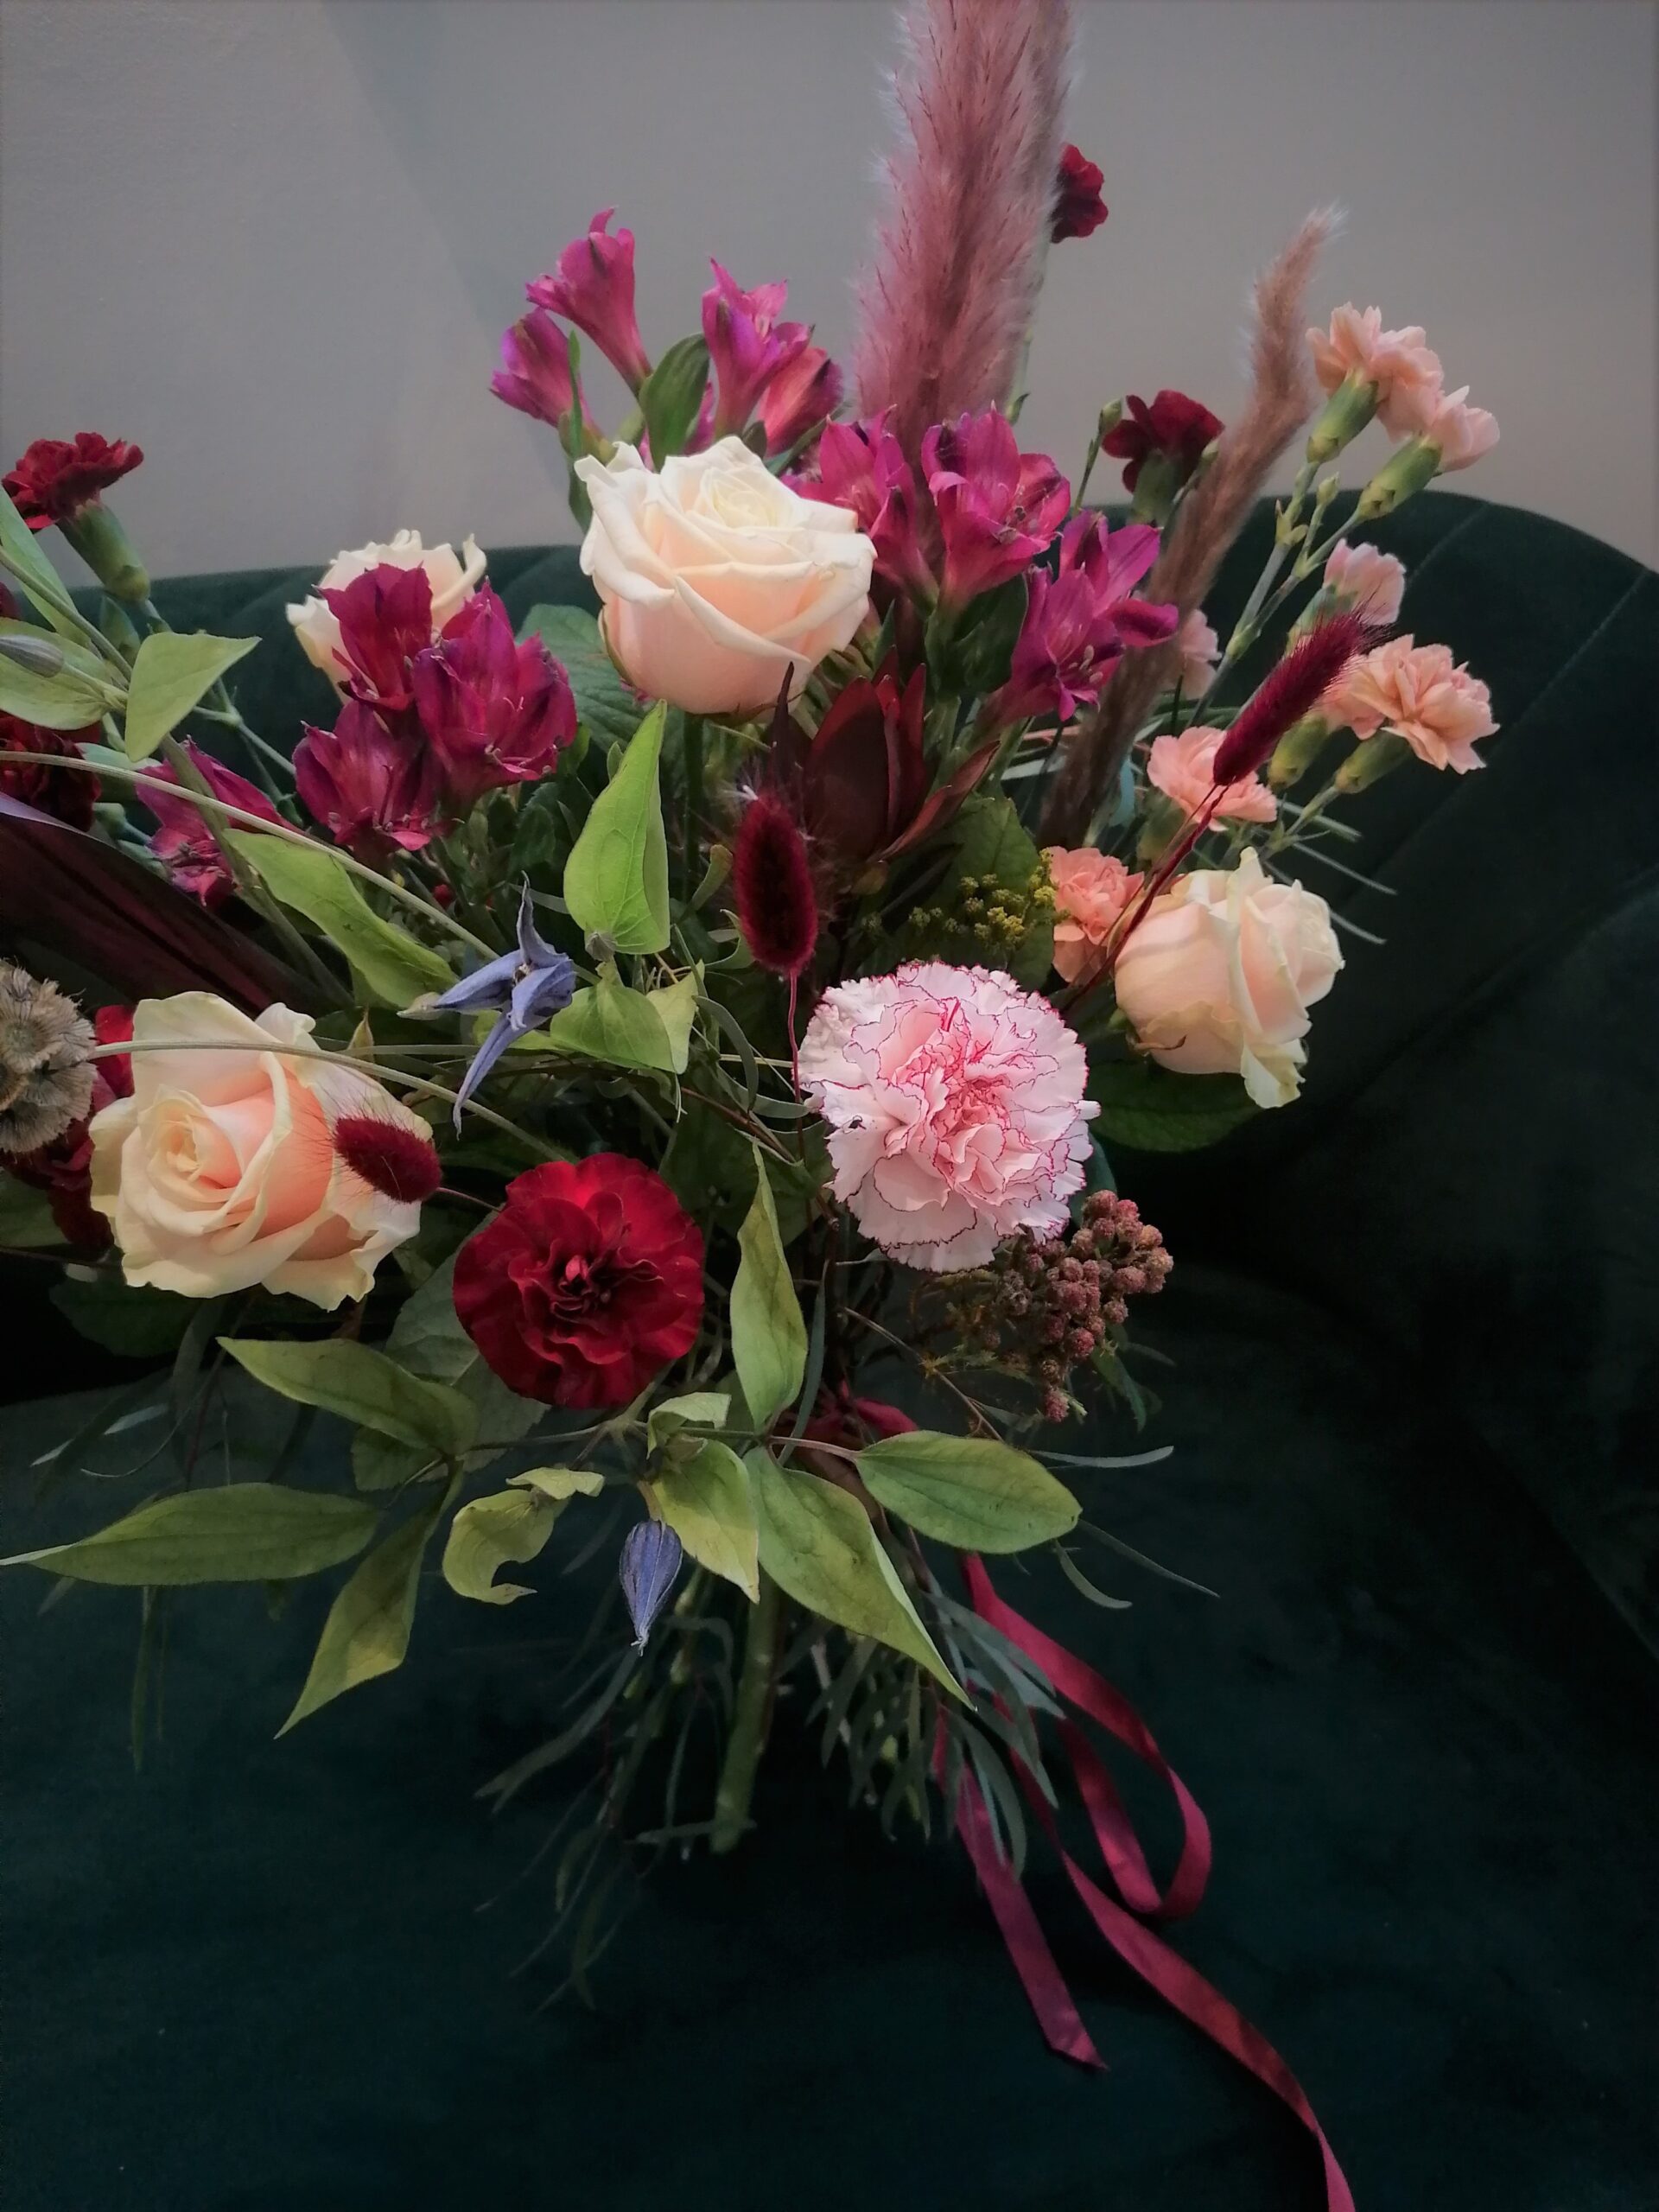 It is a proposal that speaks the language of poets.-"You are special, just like the bouquet for you" Sensual, light, intriguing, distinctive. In the bouquet: roses, carnations, alstroemeria, clematis, scabiosa, grasses.